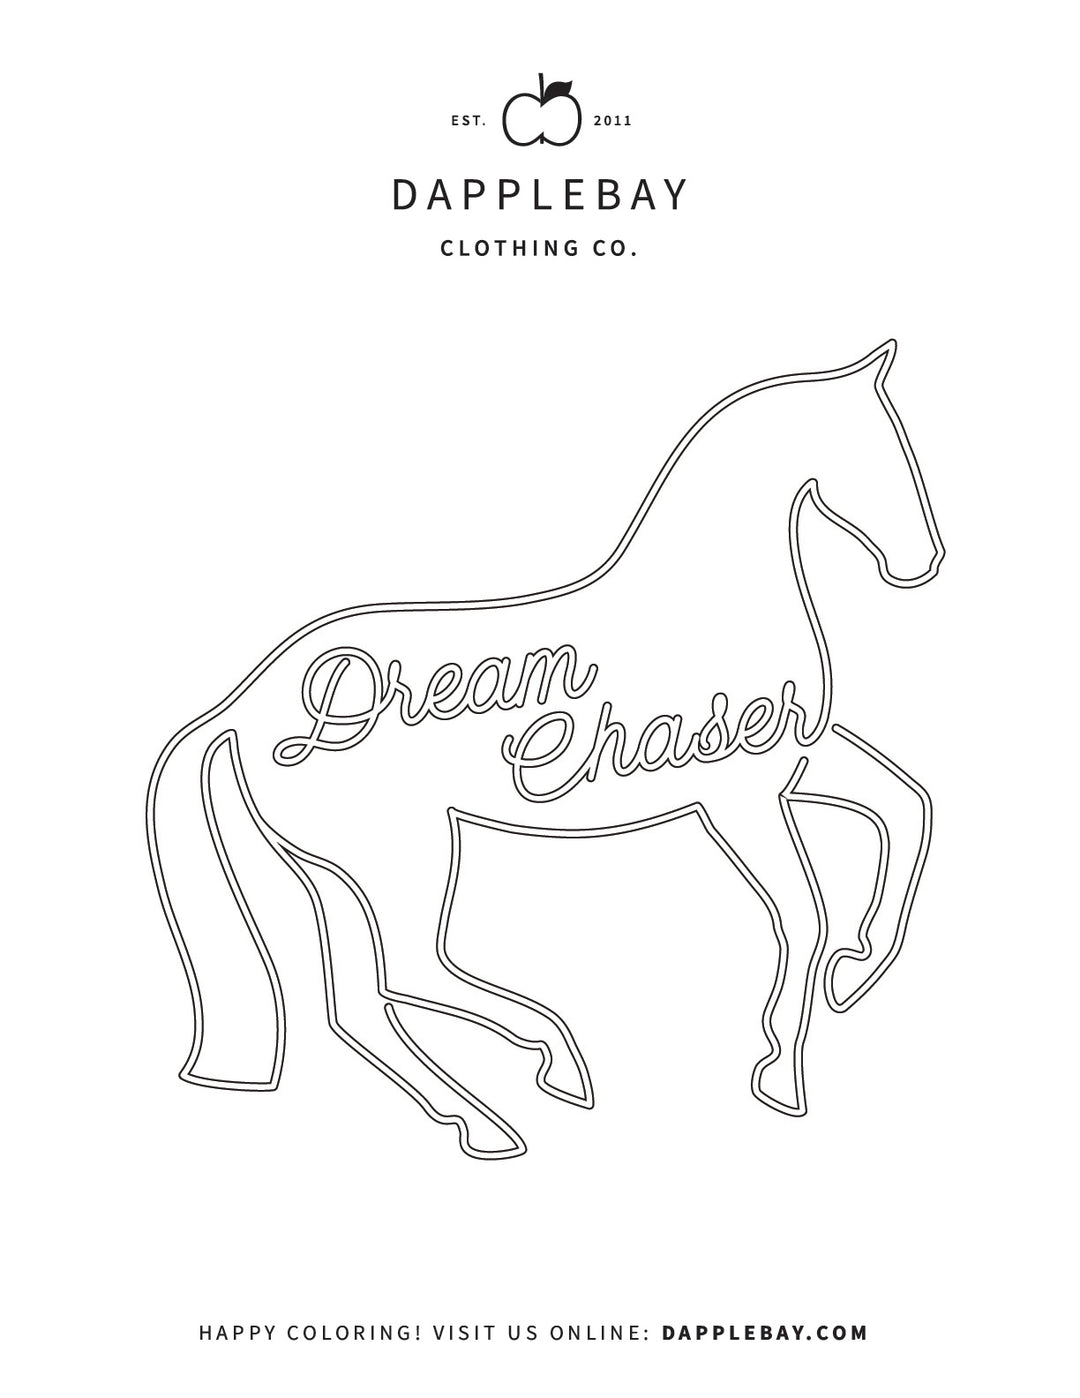 Coloring Page - Dressage Dream Chaser